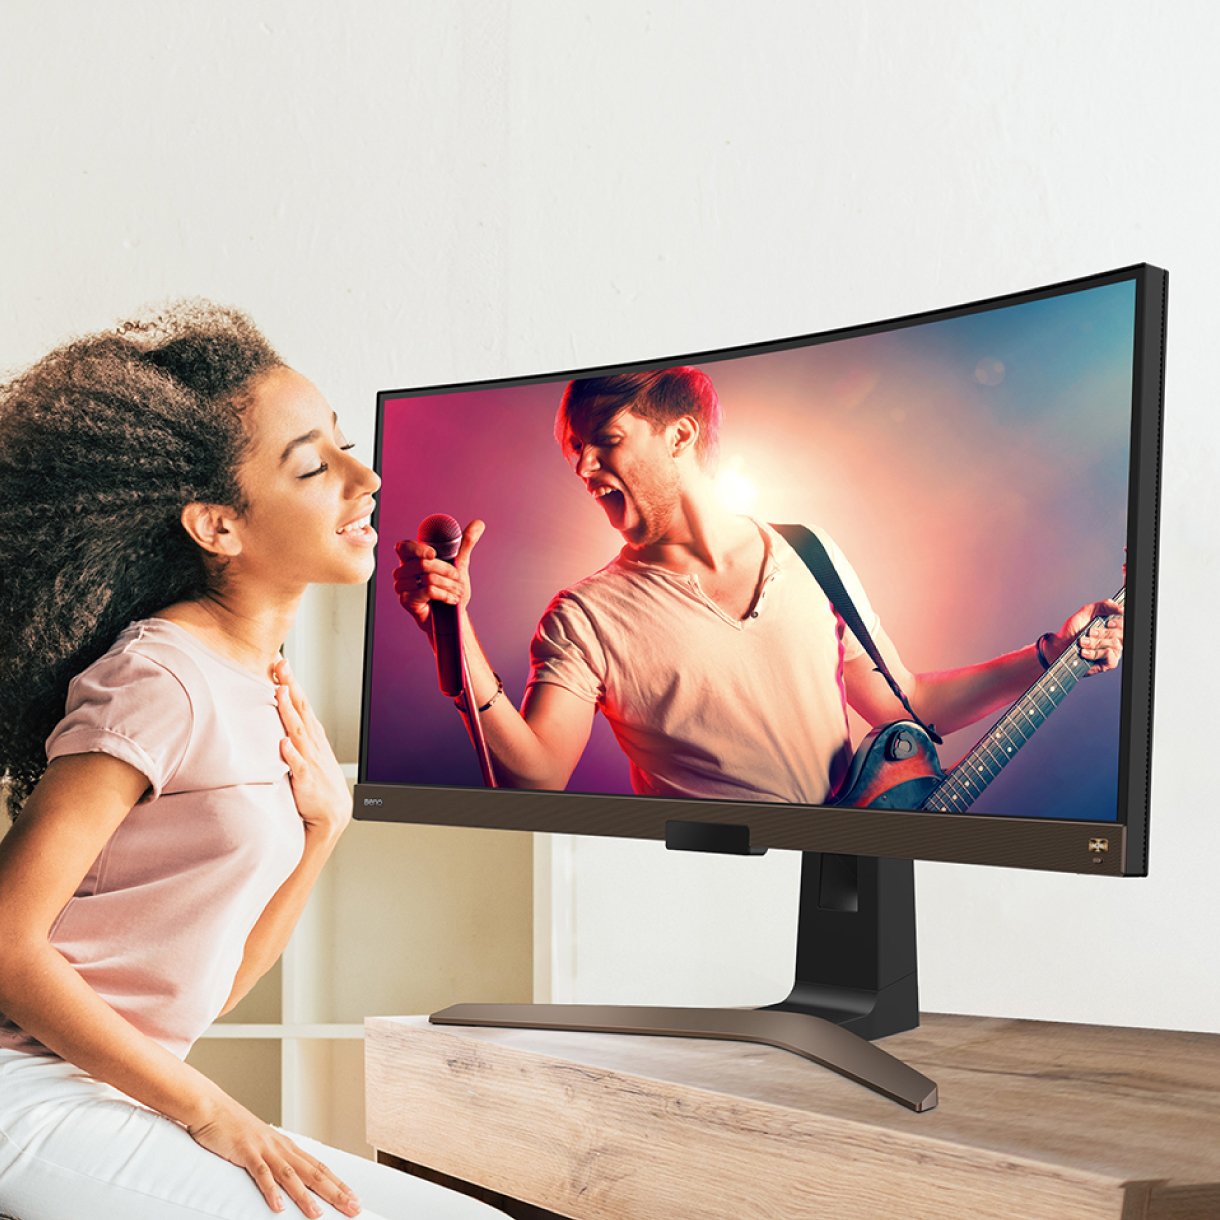 benq ew3880r Pop/Live Mode ensures clear vocals and realistic, live audio quality